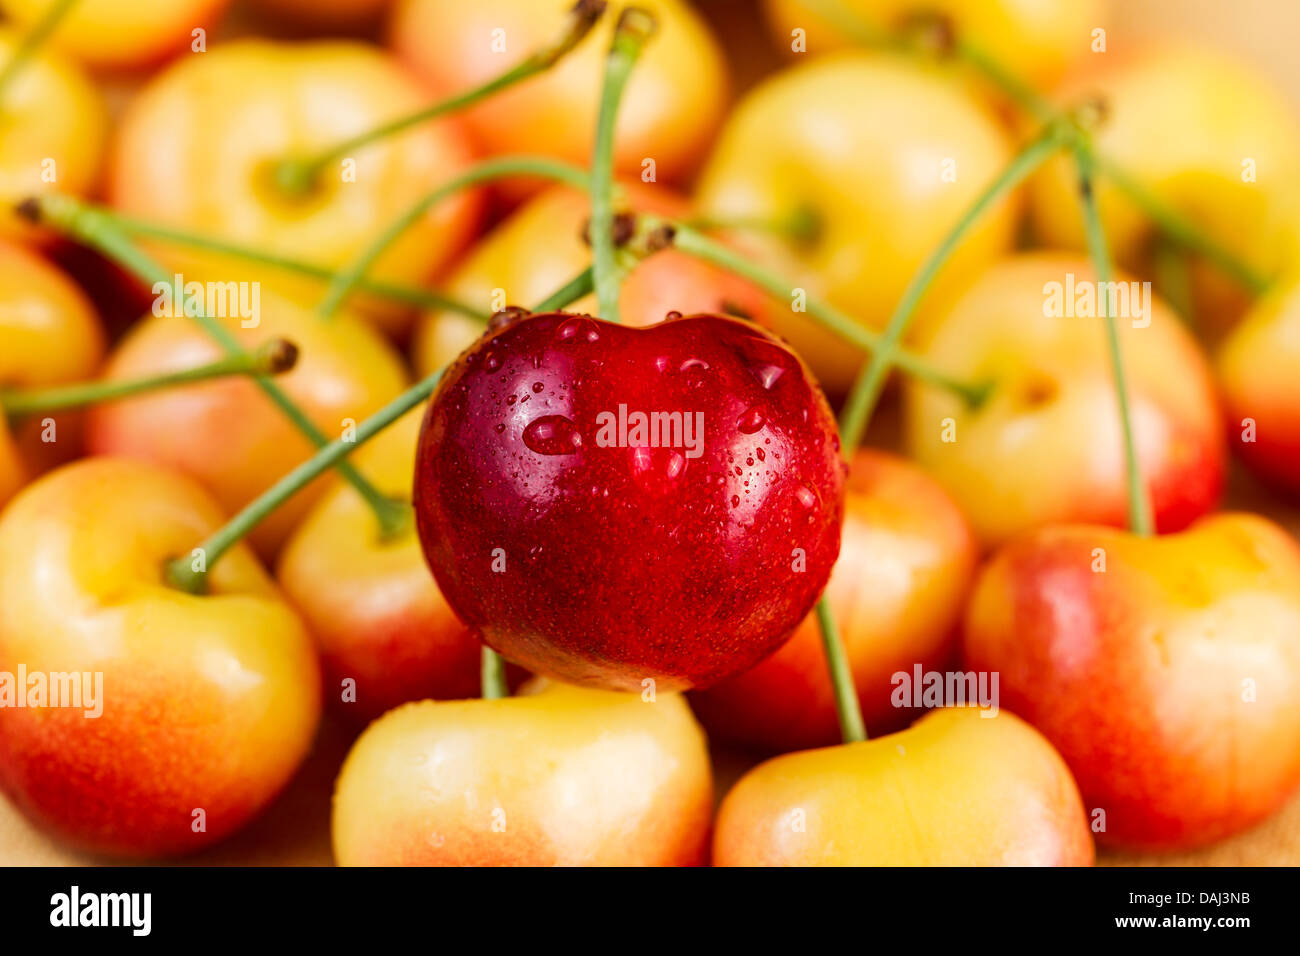 Closeup horizontal photo of a single red Rainier cherry, with water drops, in pile of golden cherries in background Stock Photo